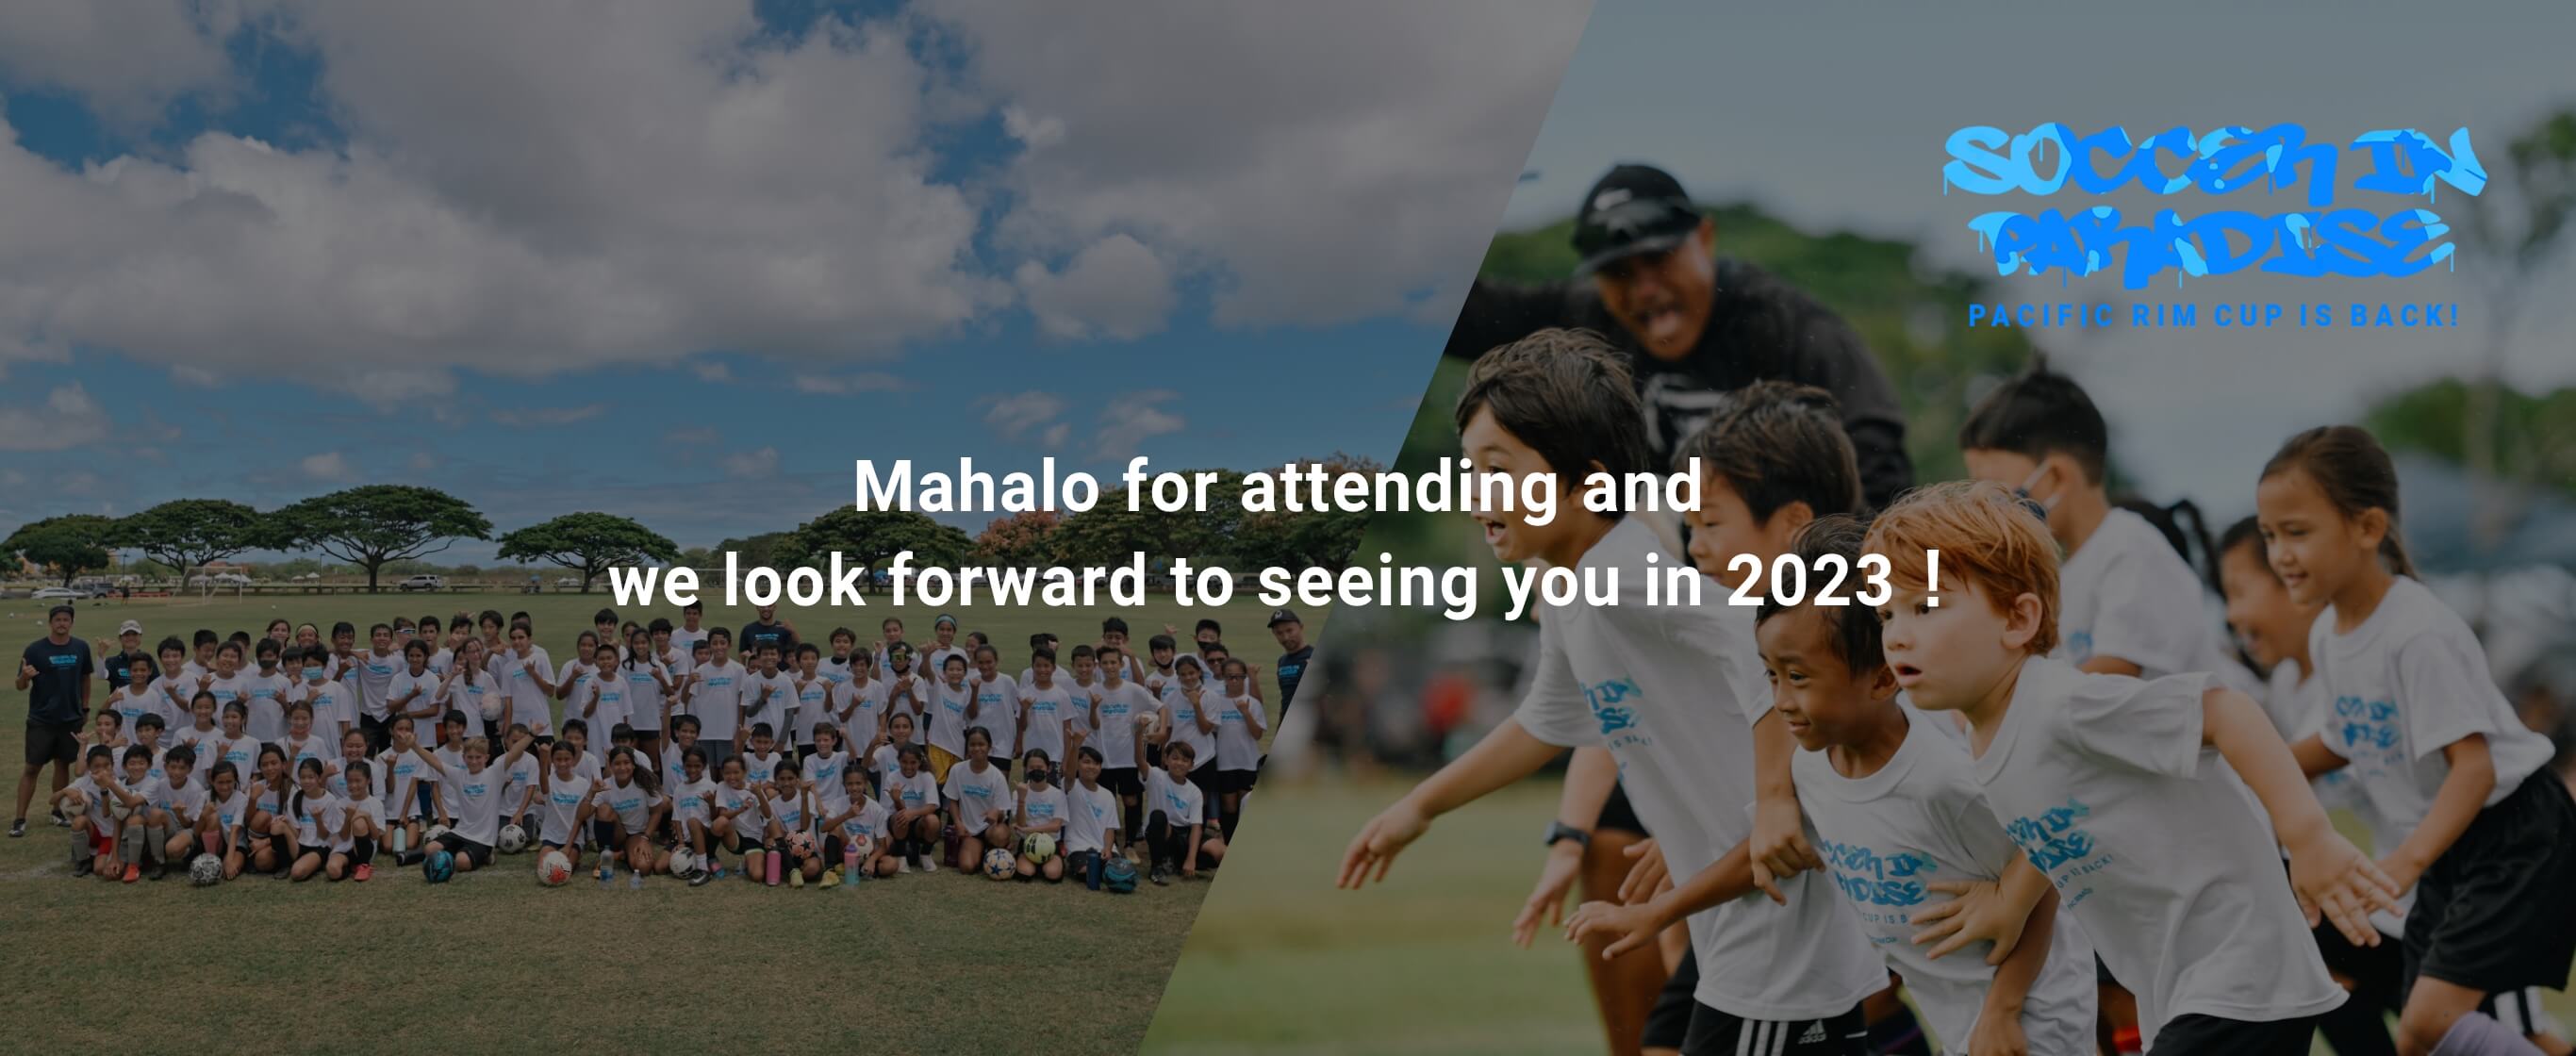 Mahalo for attending and we look forward to seeing you in 2023！